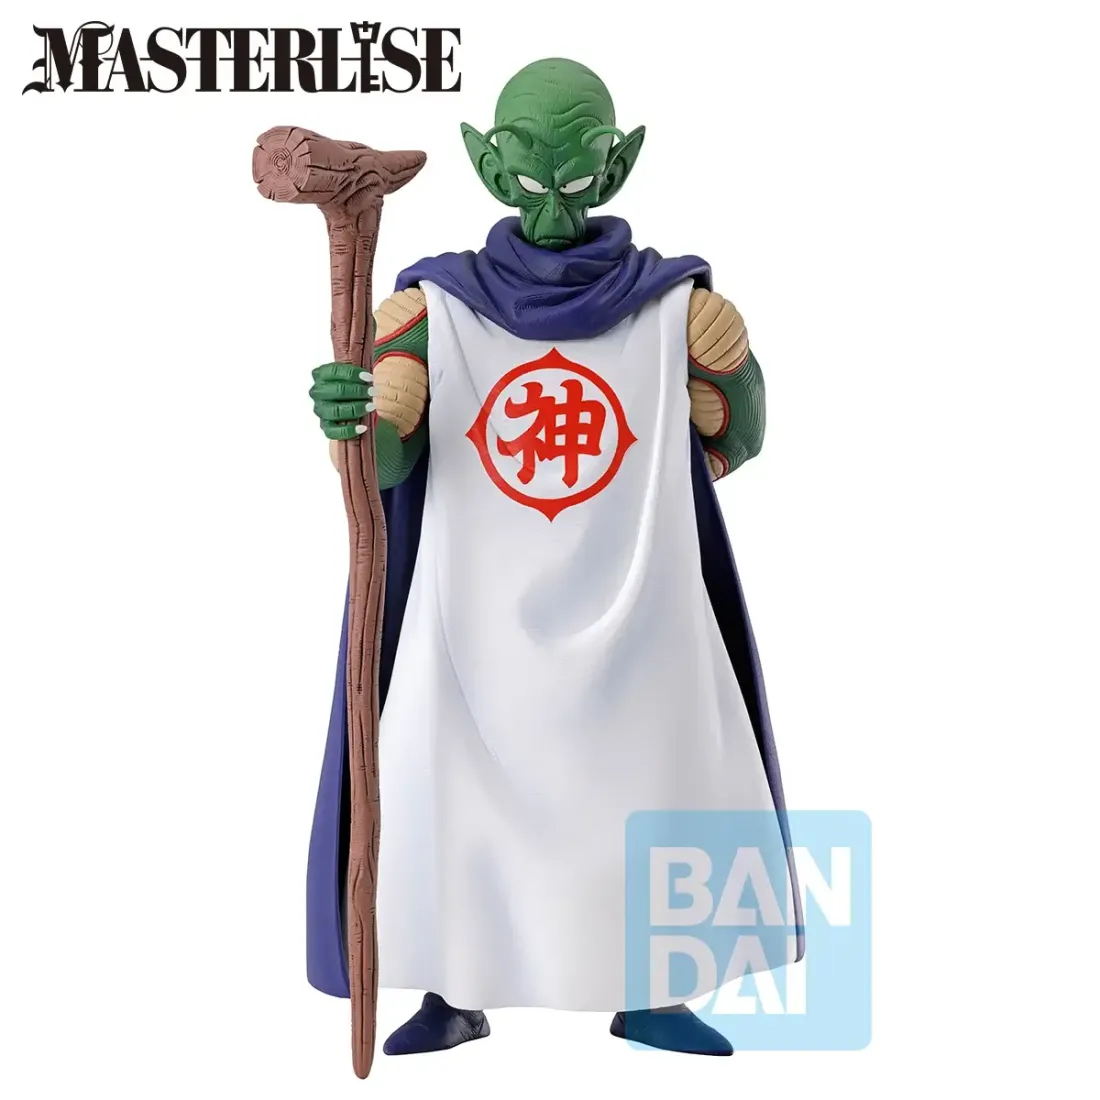 Ichibansho Masterlise Kami (Lookout Above the Clouds) Figure 